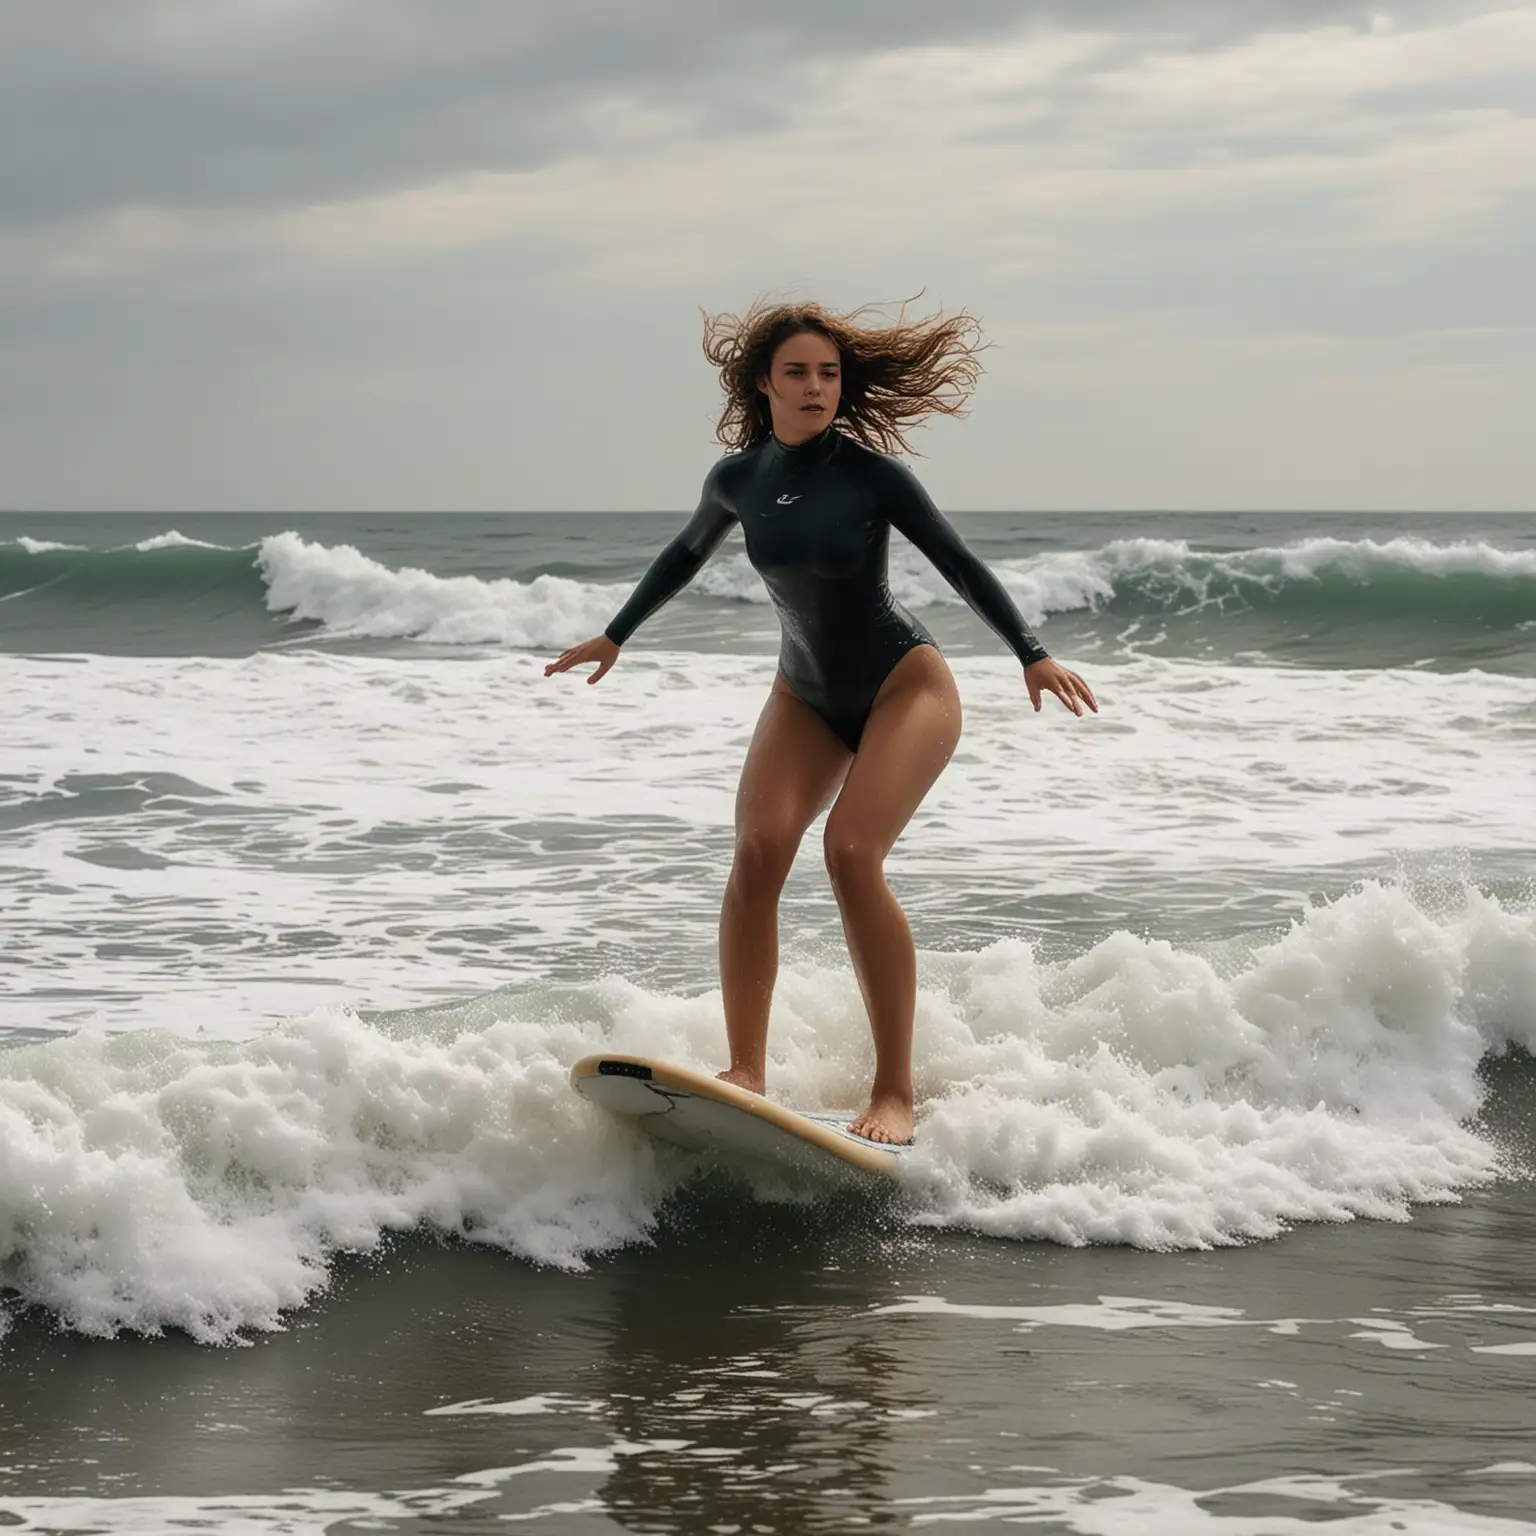 Graceful-Surfing-Young-Woman-Dancing-with-Huge-Waves